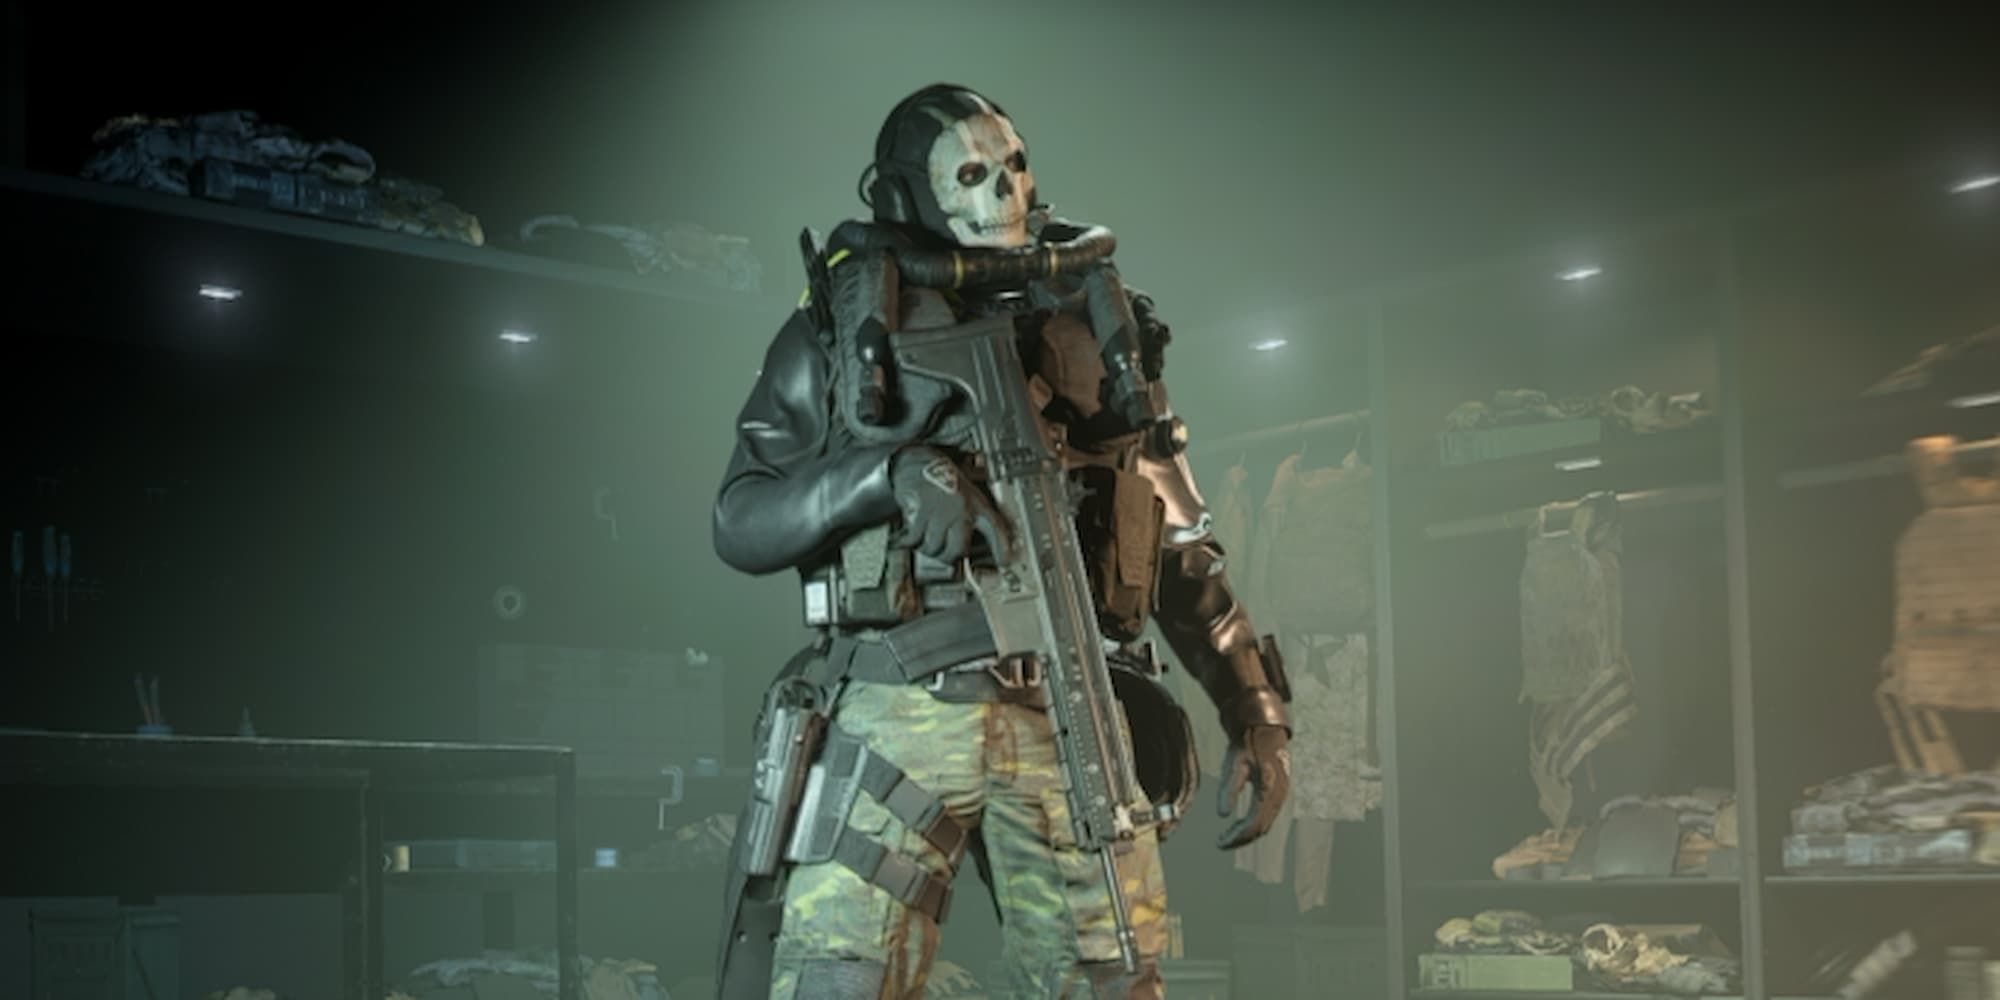 The Loch Ghost Operator skin in MW2 stands in the locker room with one hand holding a weapon pointed towards the ground.